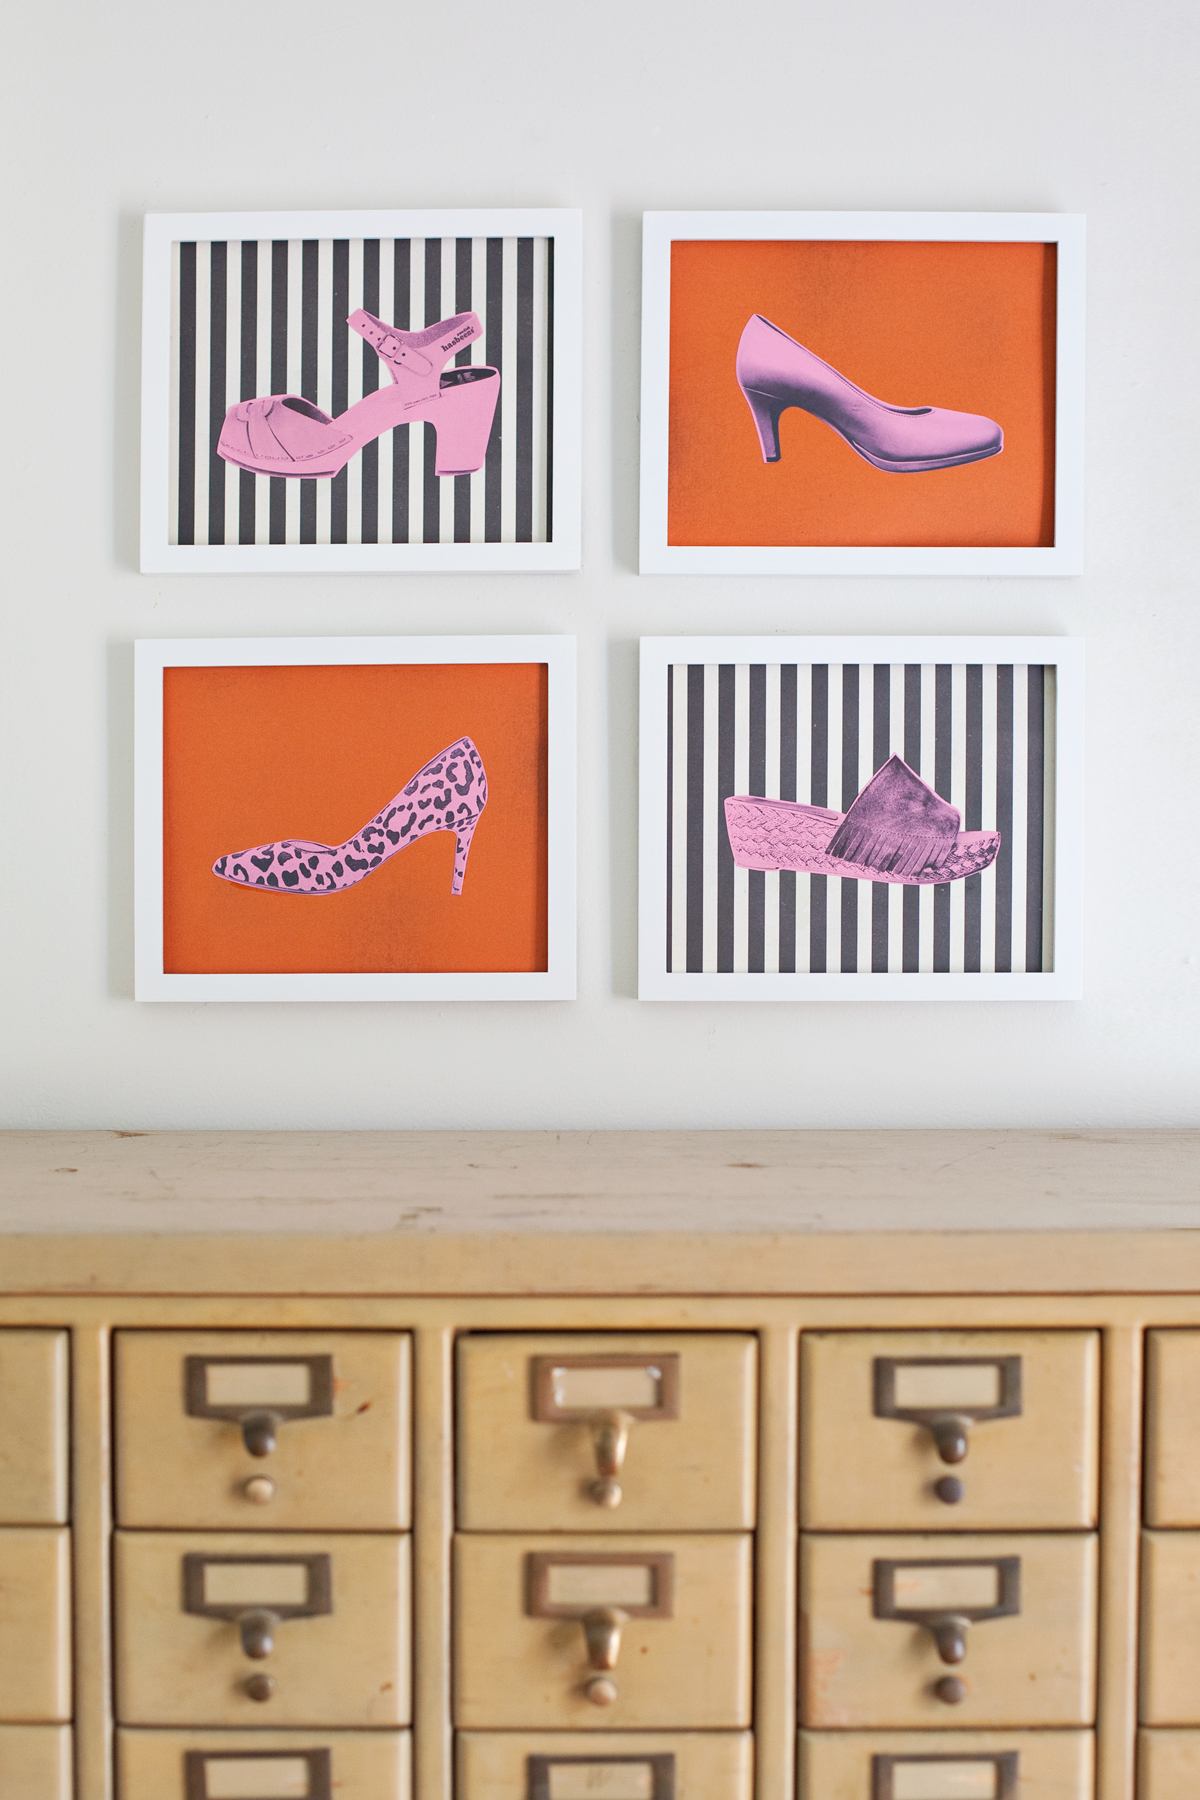 Turn your shoe collection into wall art!